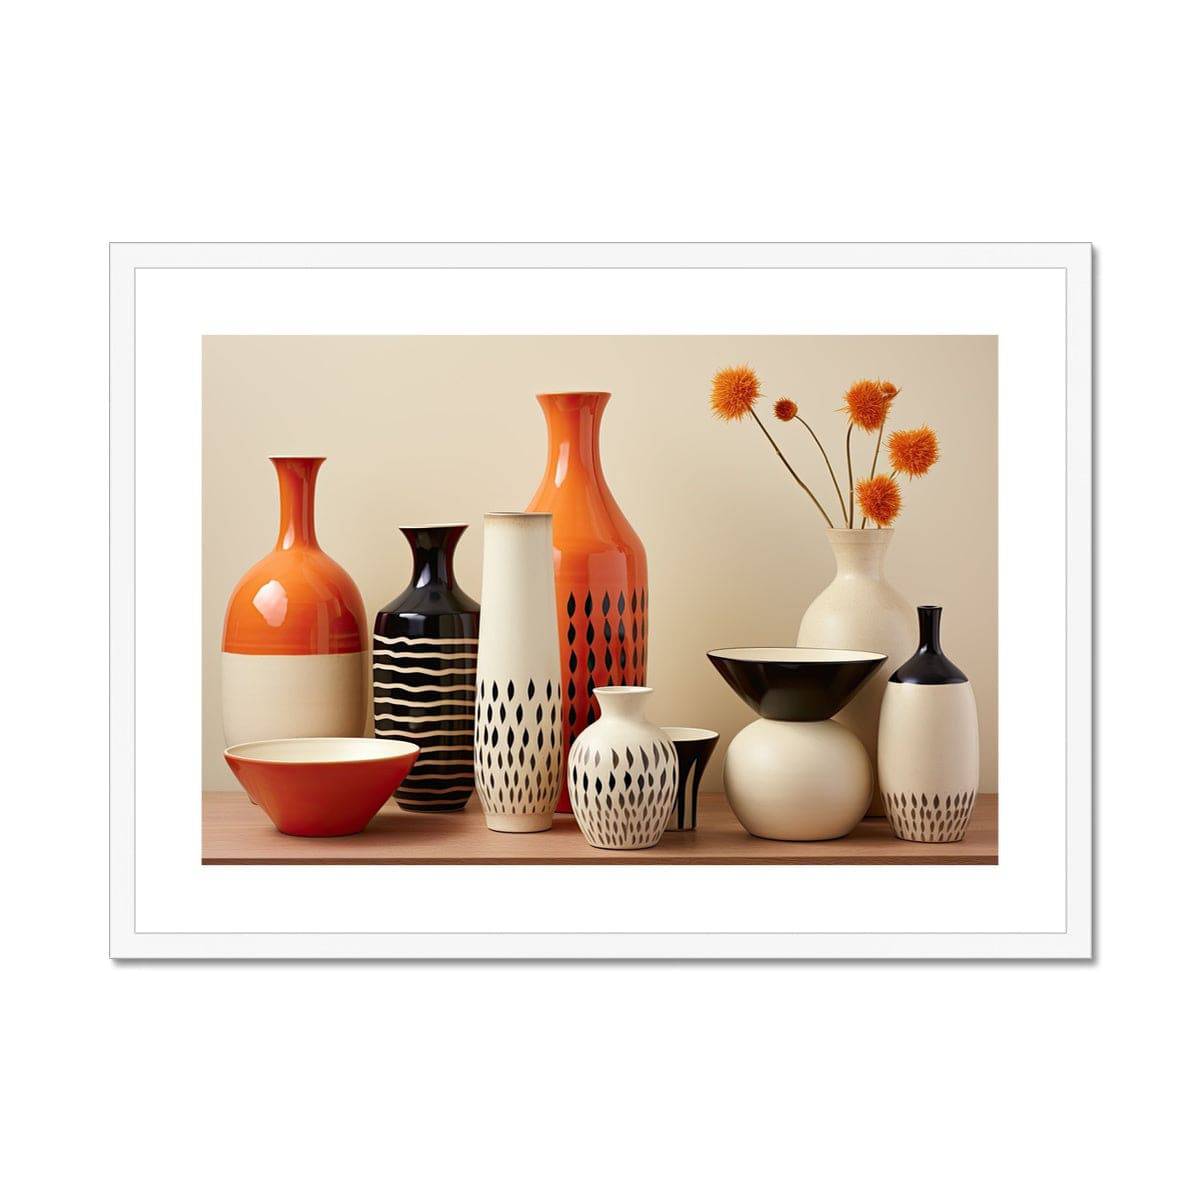 The Kitchin Framed & Mounted Print - Pixel Gallery